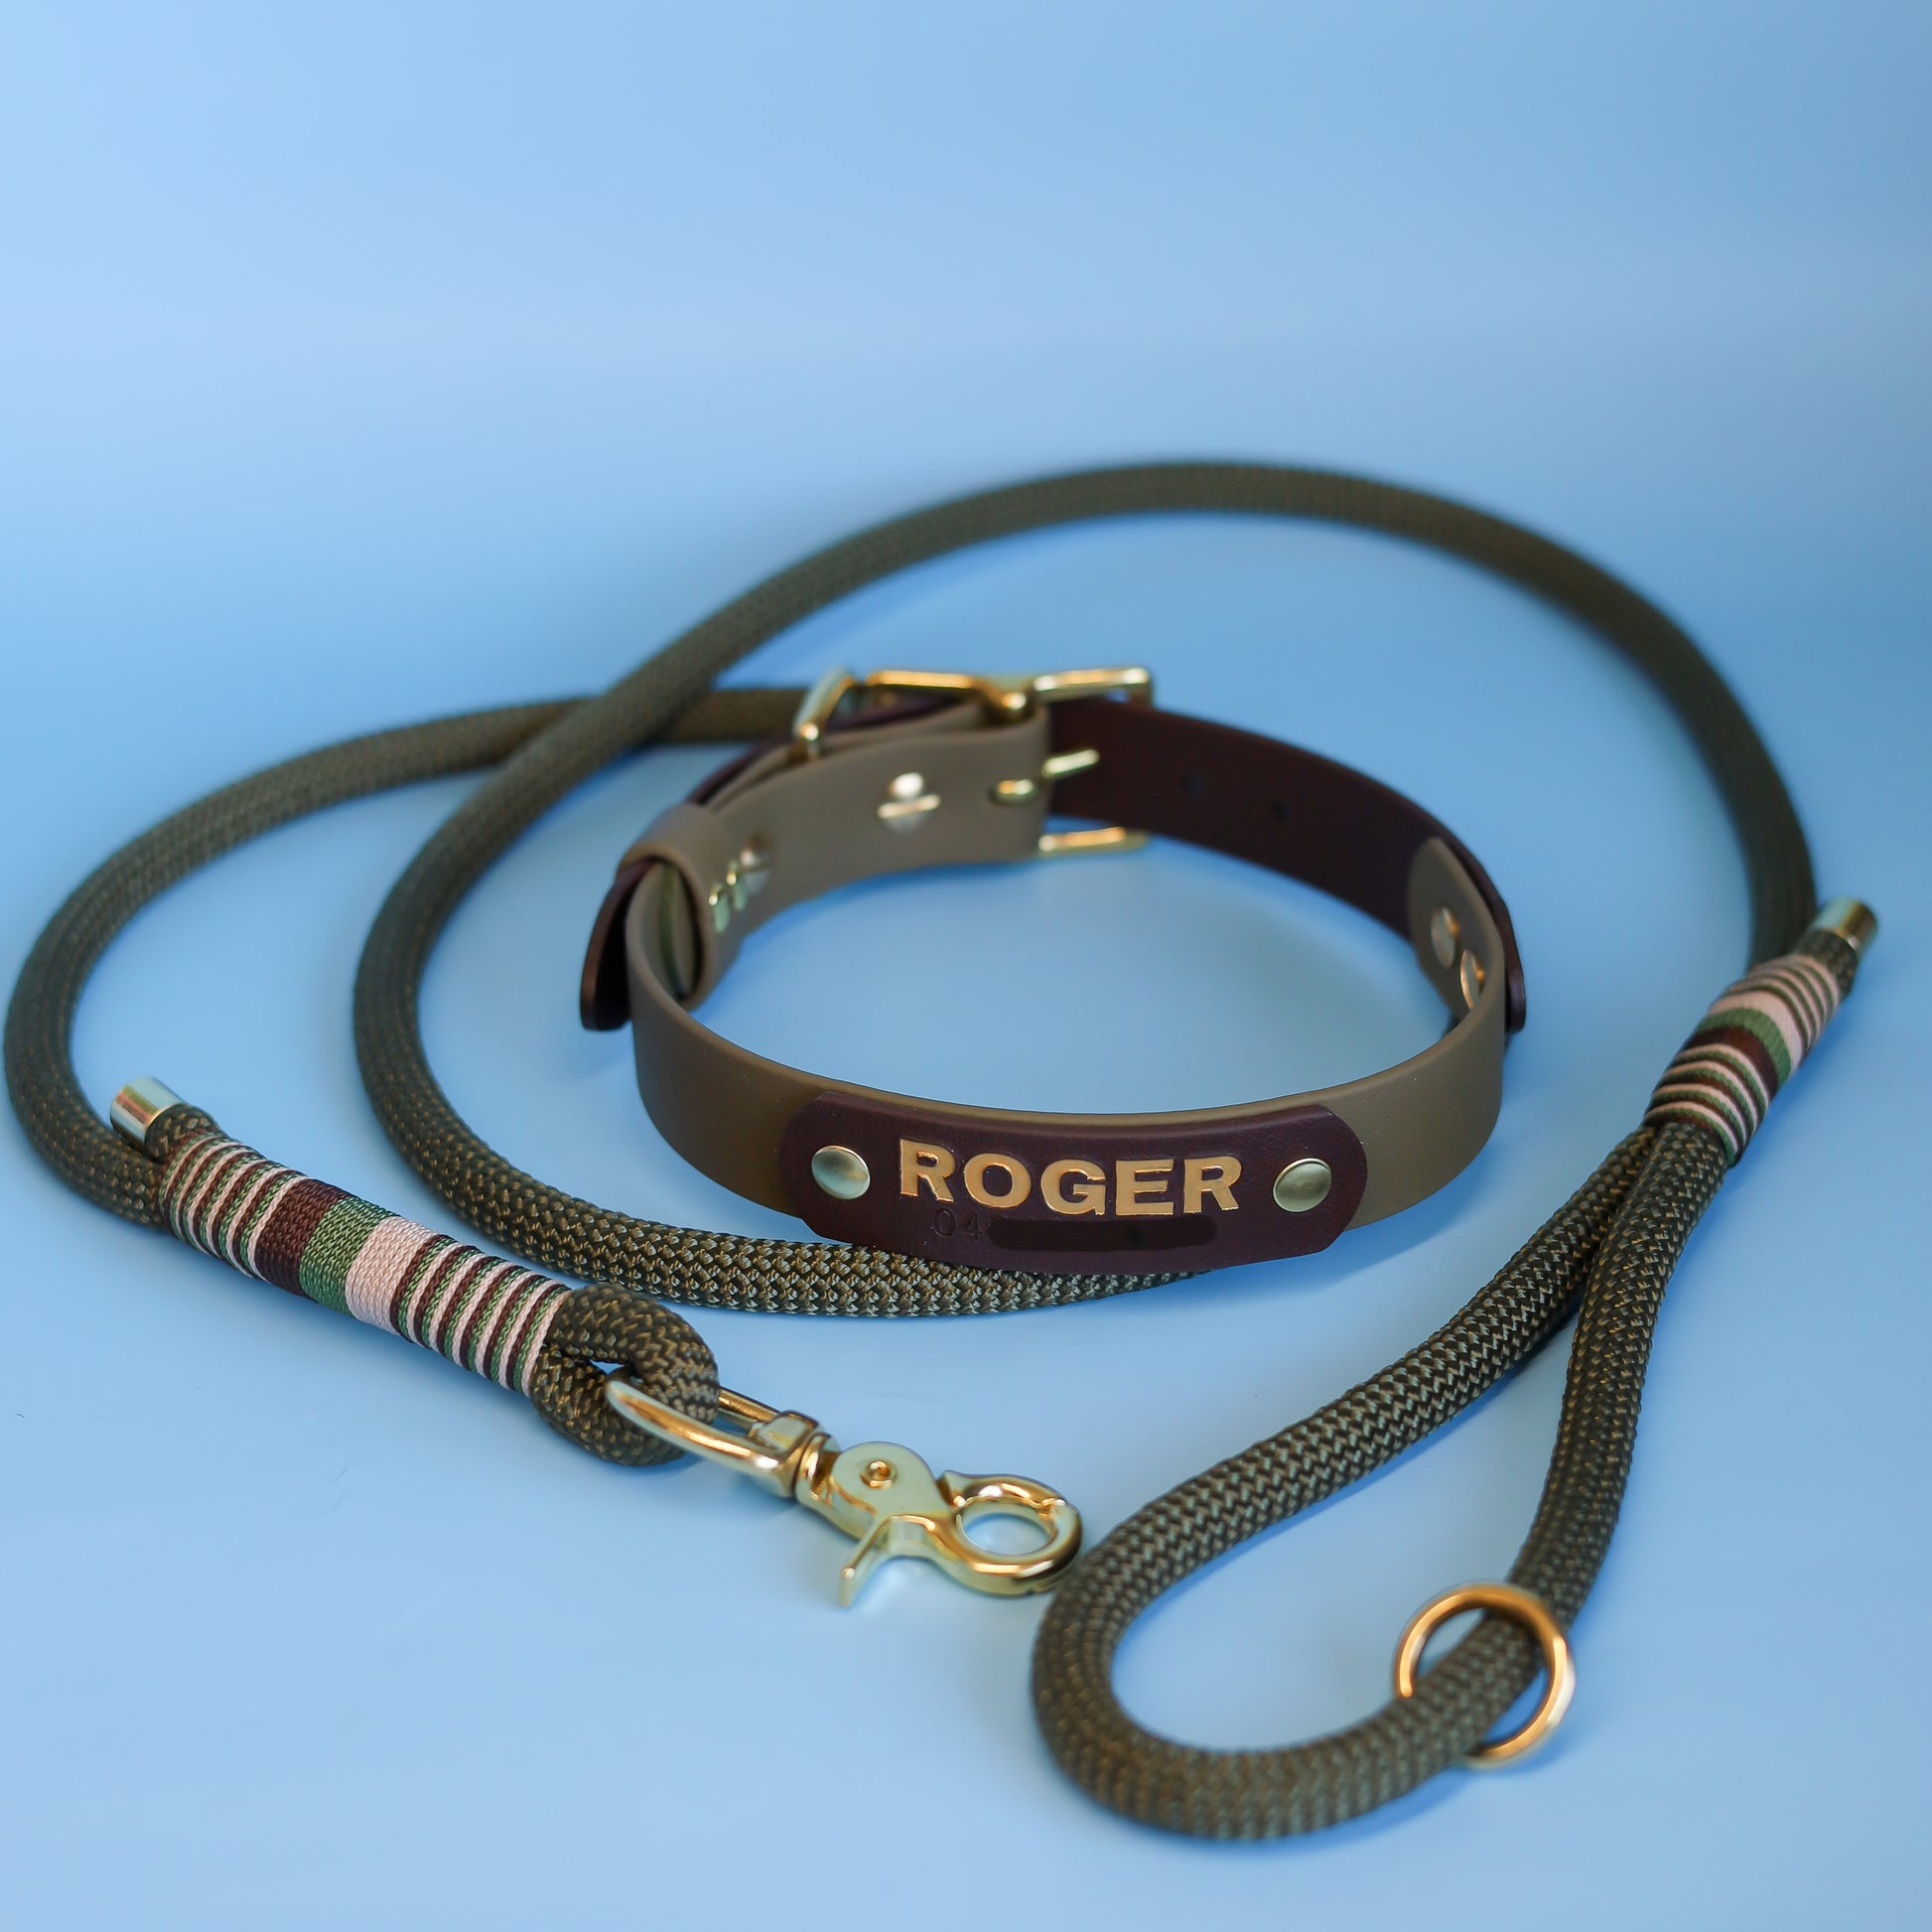 2-Color luxury dog collar with brass fittings – Waggy Pooch